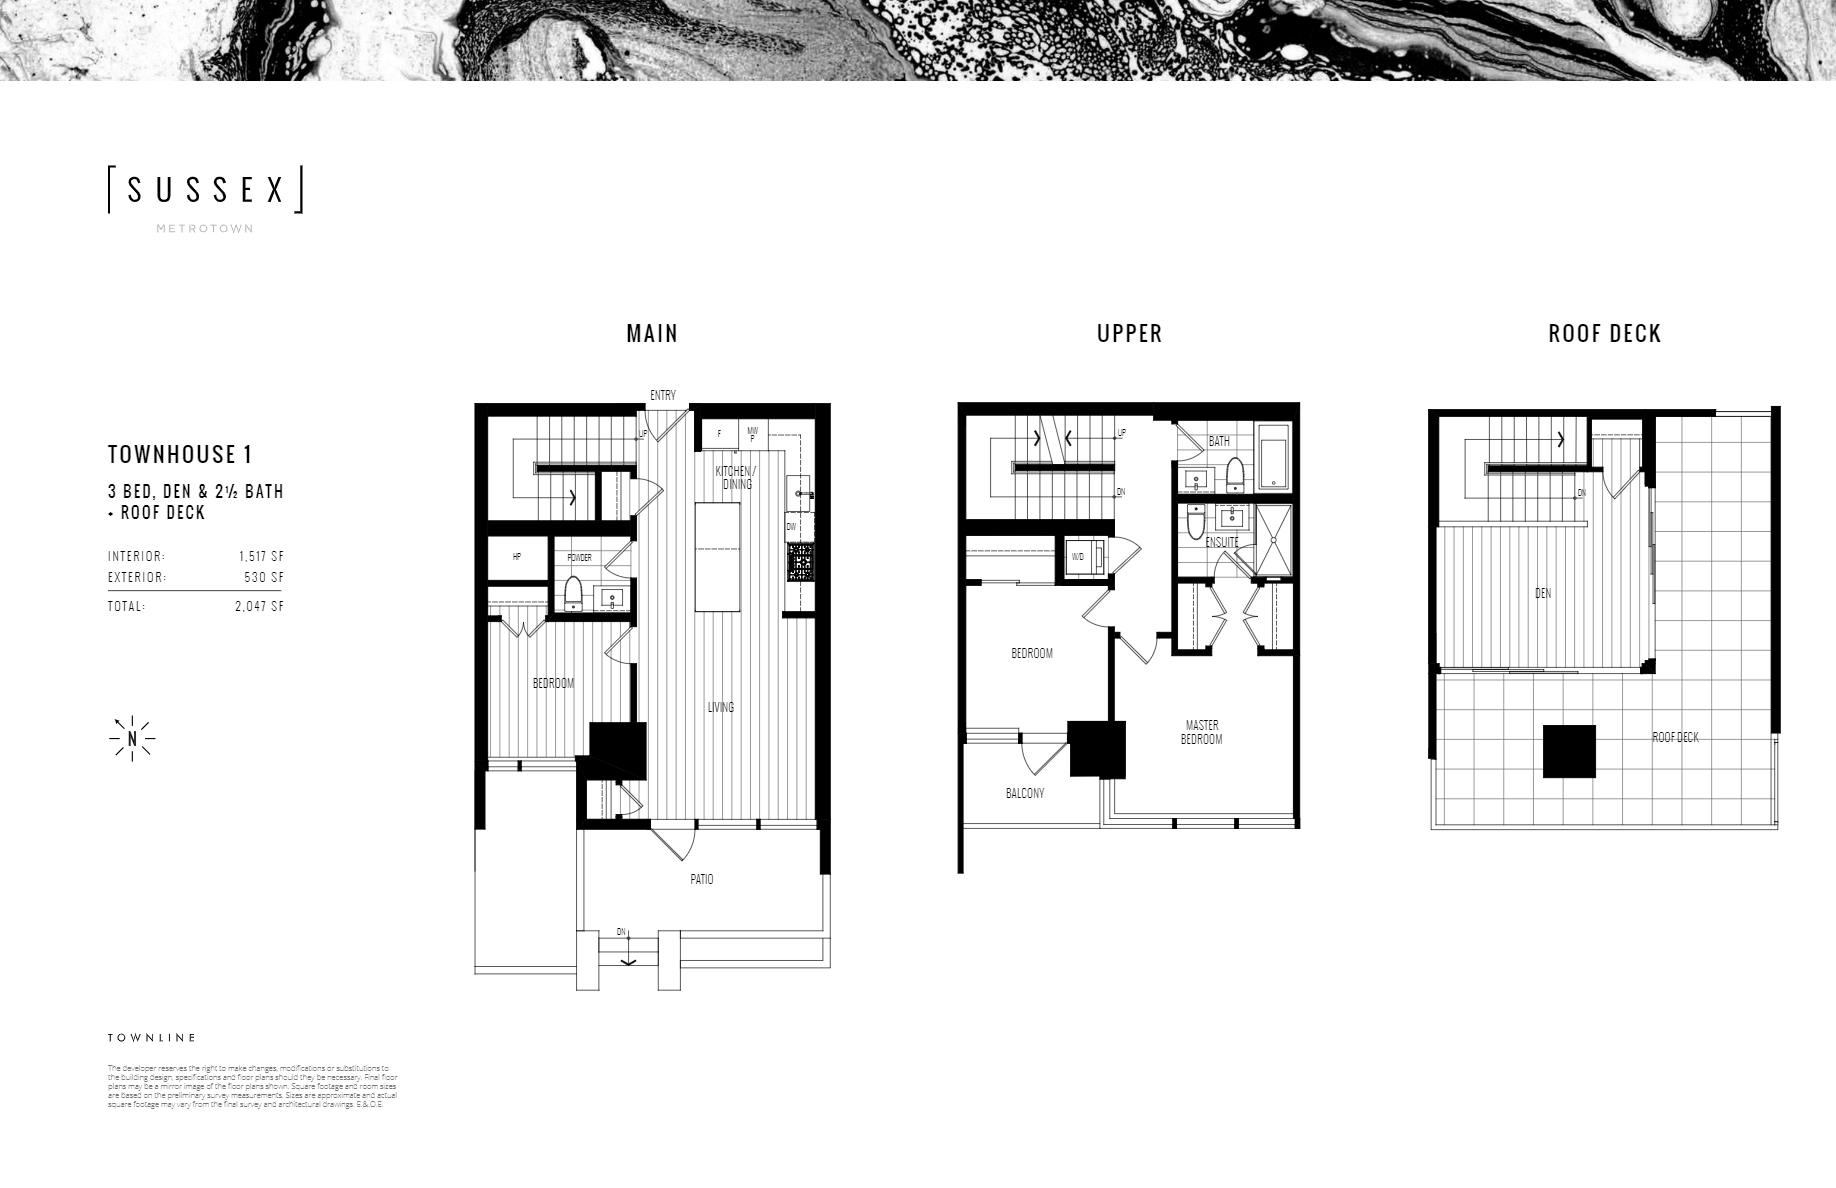  TH #1  Floor Plan of Sussex Condos with undefined beds